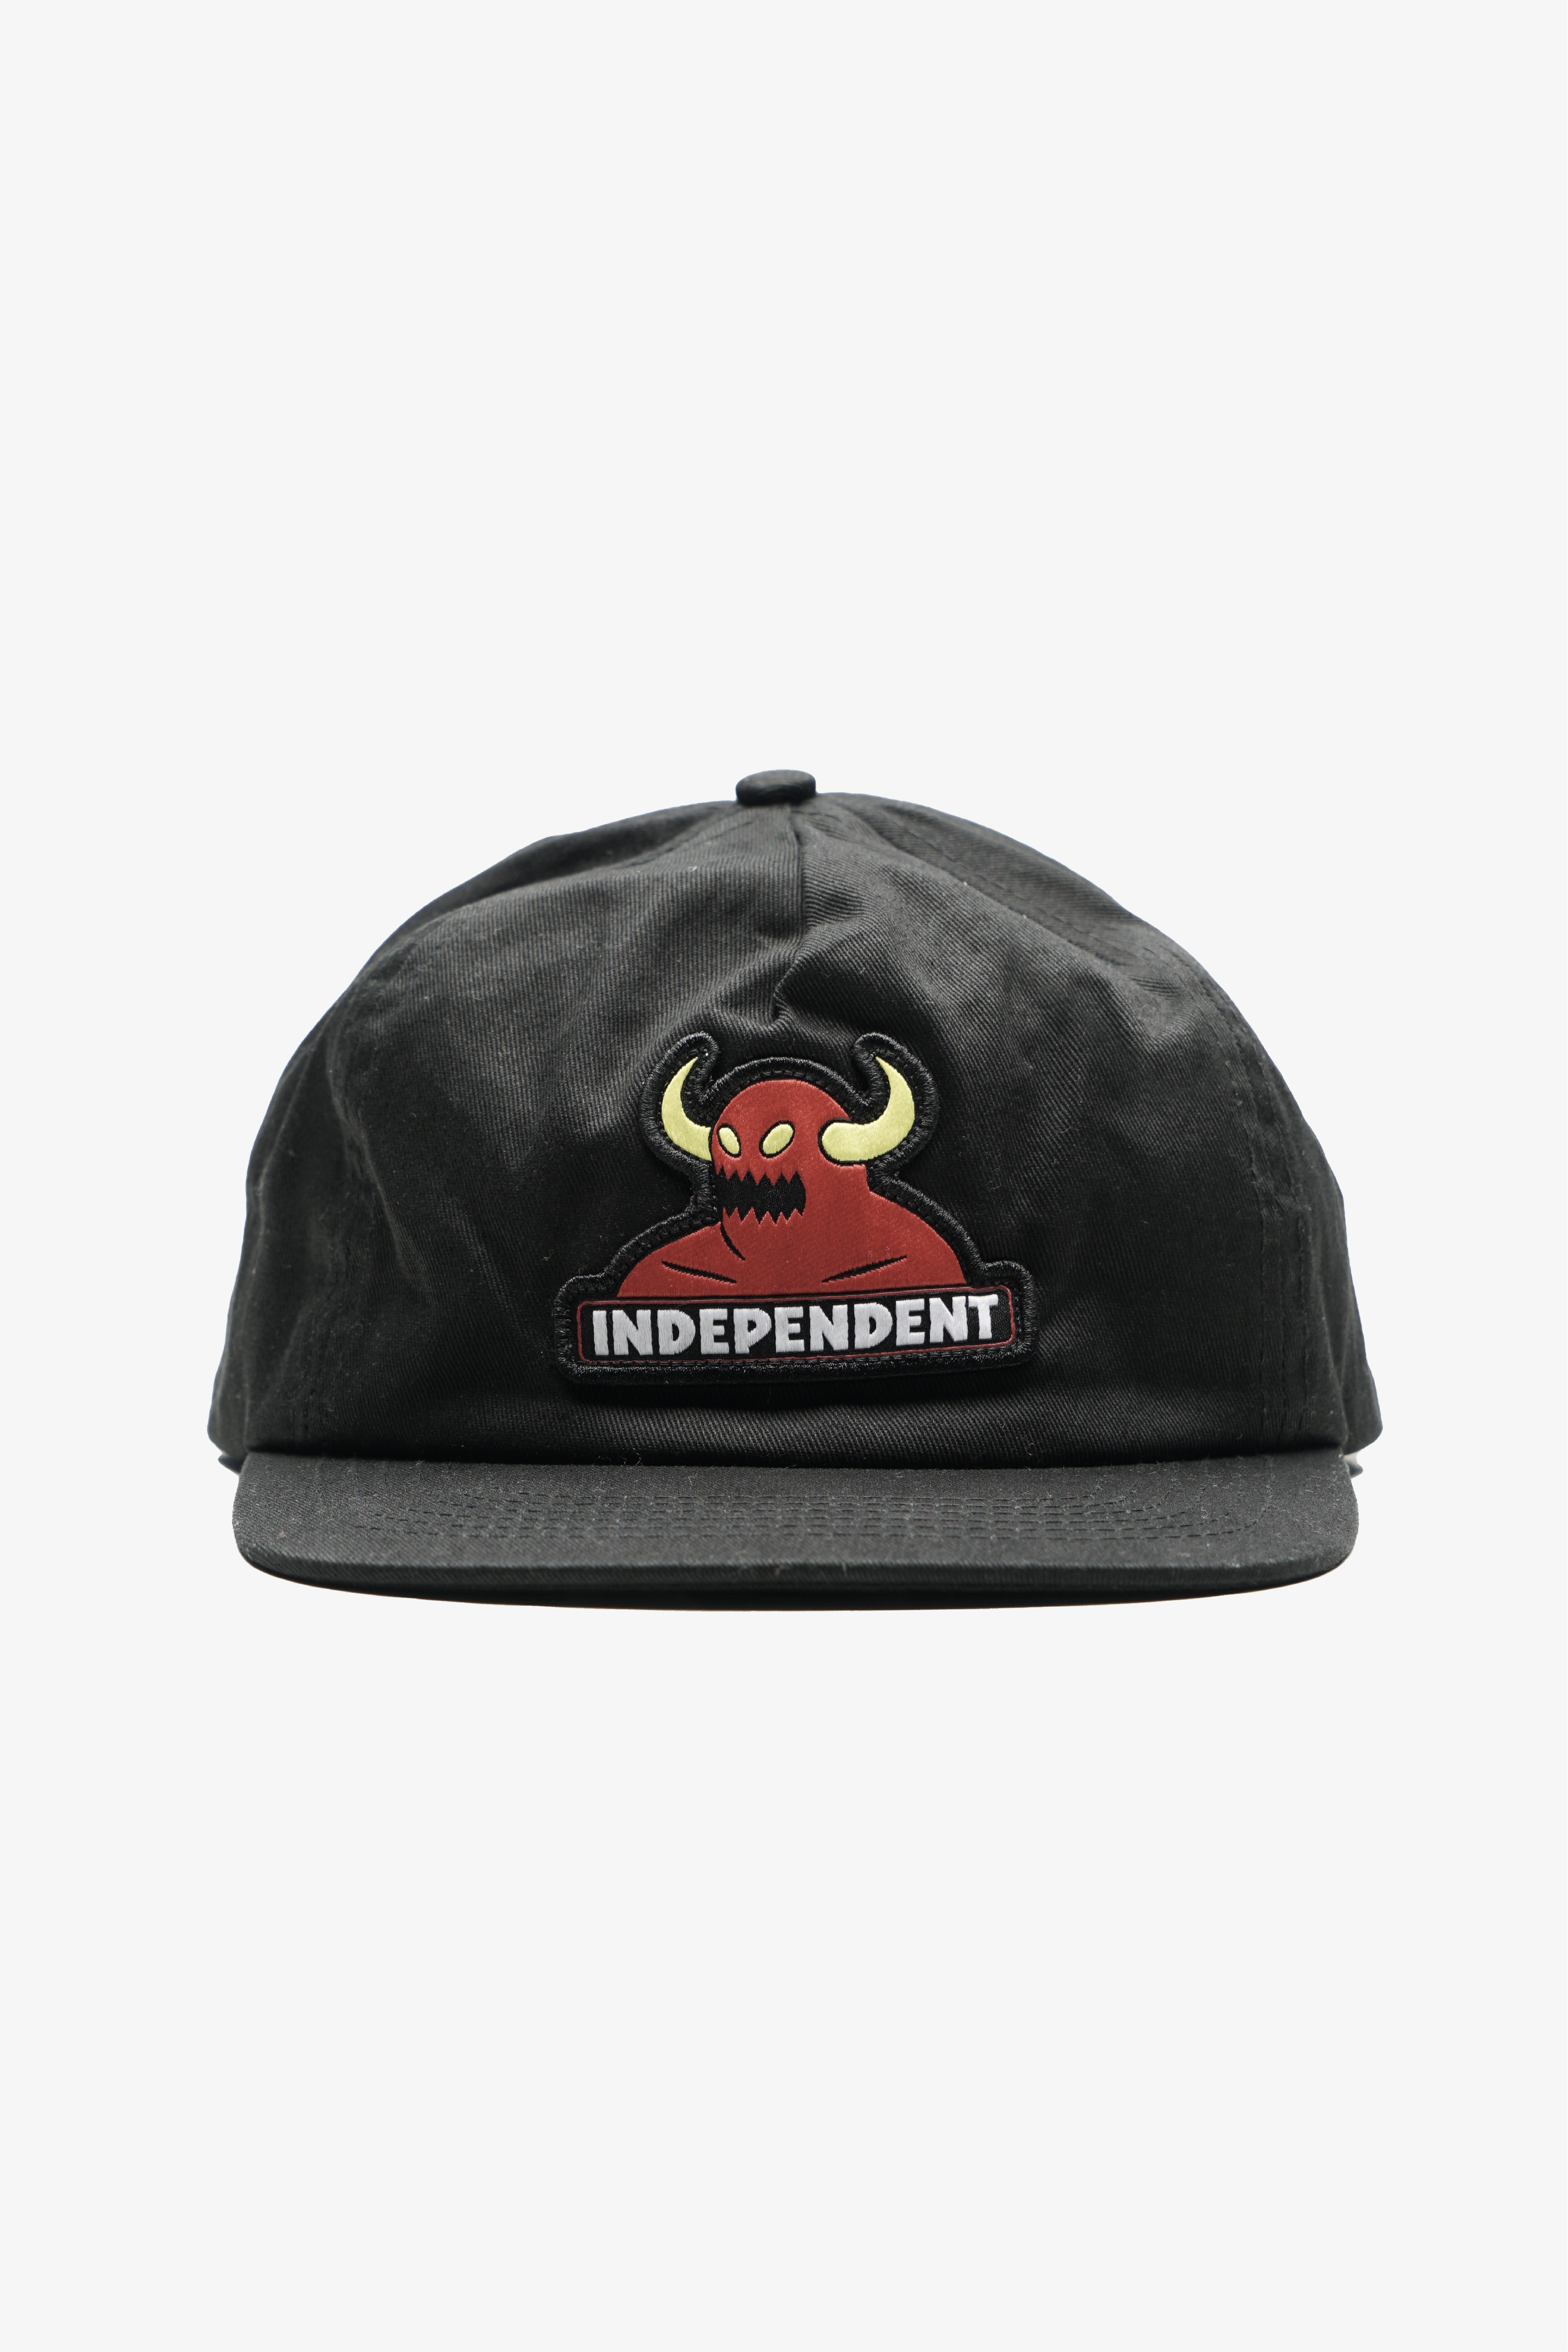 Selectshop FRAME - INDEPENDENT Toy Machine Bar Snapback Unstructured Hat All-Accessories Dubai